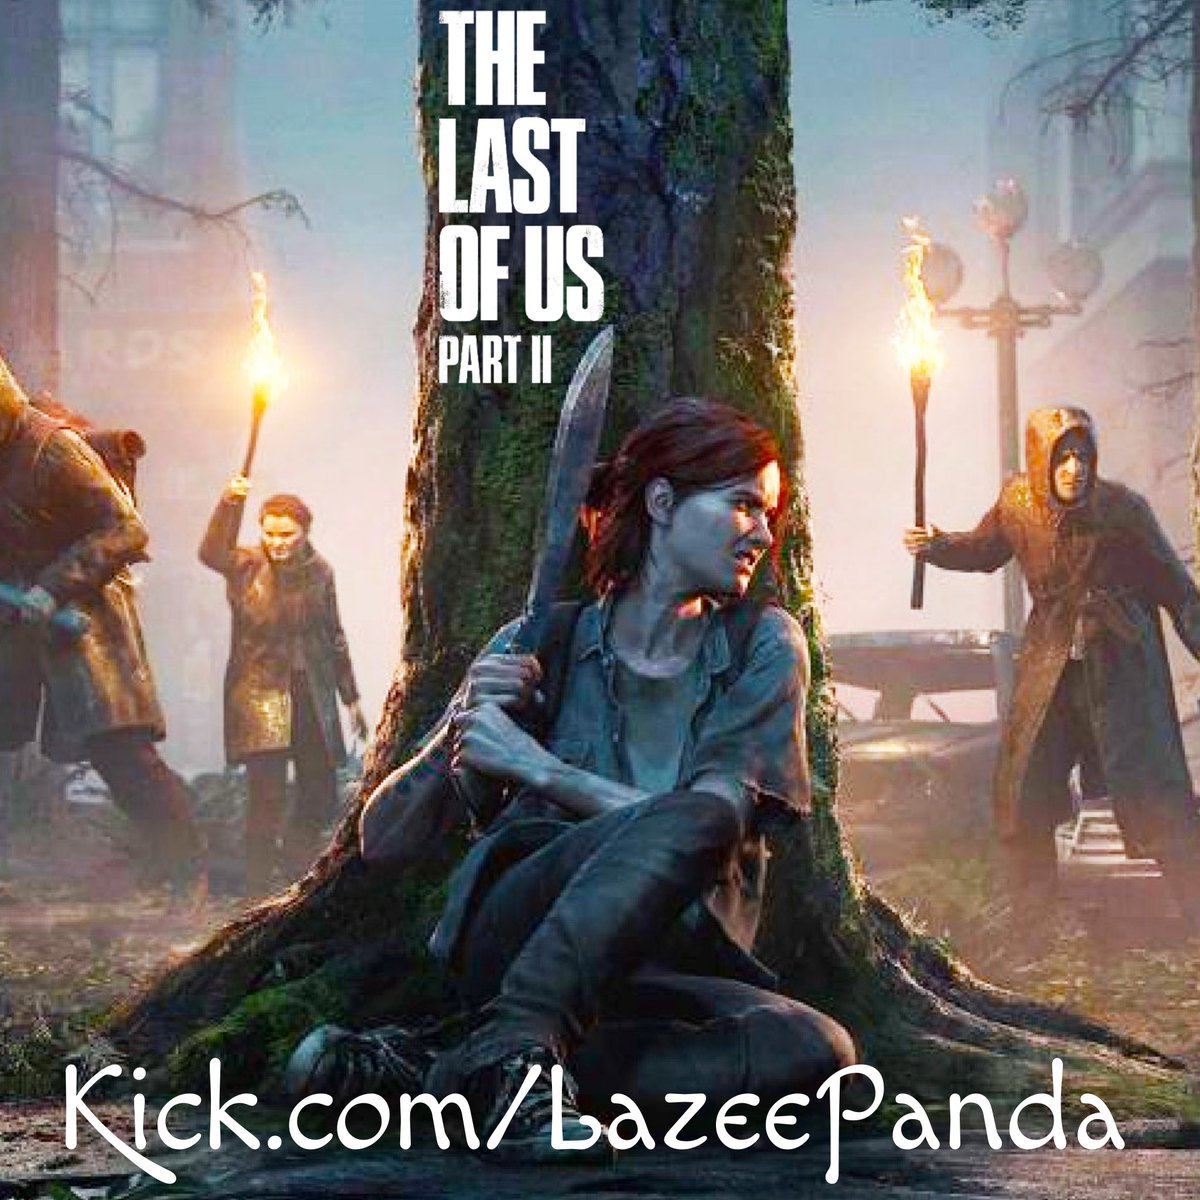 💥 Live Now on The Green 💥

Joining Ellie (and Abby 😡) on their journeys.....

Last of Us Part 2.

Kick.com/LazeePanda 💚

#thelastofus2 #thelastofuspart2 #elliethelastofus #thelastofusellie #thelastofusedit #girlstreamerlife #gamingreactions #playgames #streamer